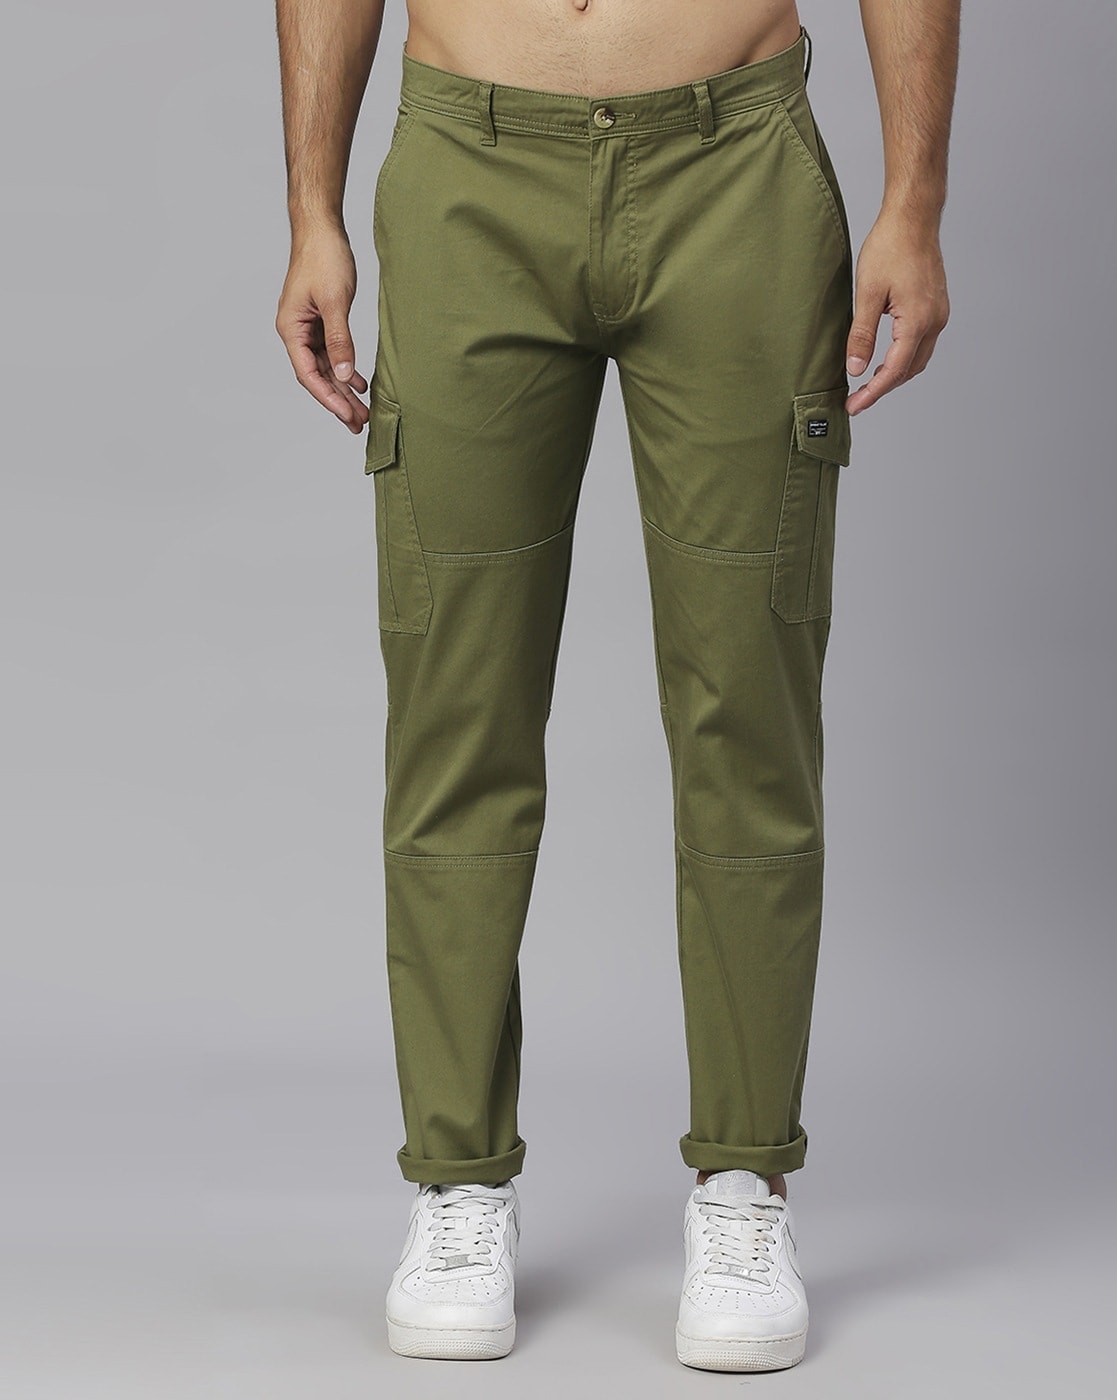 The Souled Store Solids: Light Olive Mens and Boys Cotton and Elastane  Brown Color Men Cargo Pants Men Joggers Trousers Bottoms Running Gym  Activewear Casual Lounge Training Track Jogging Hiking : Amazon.in: